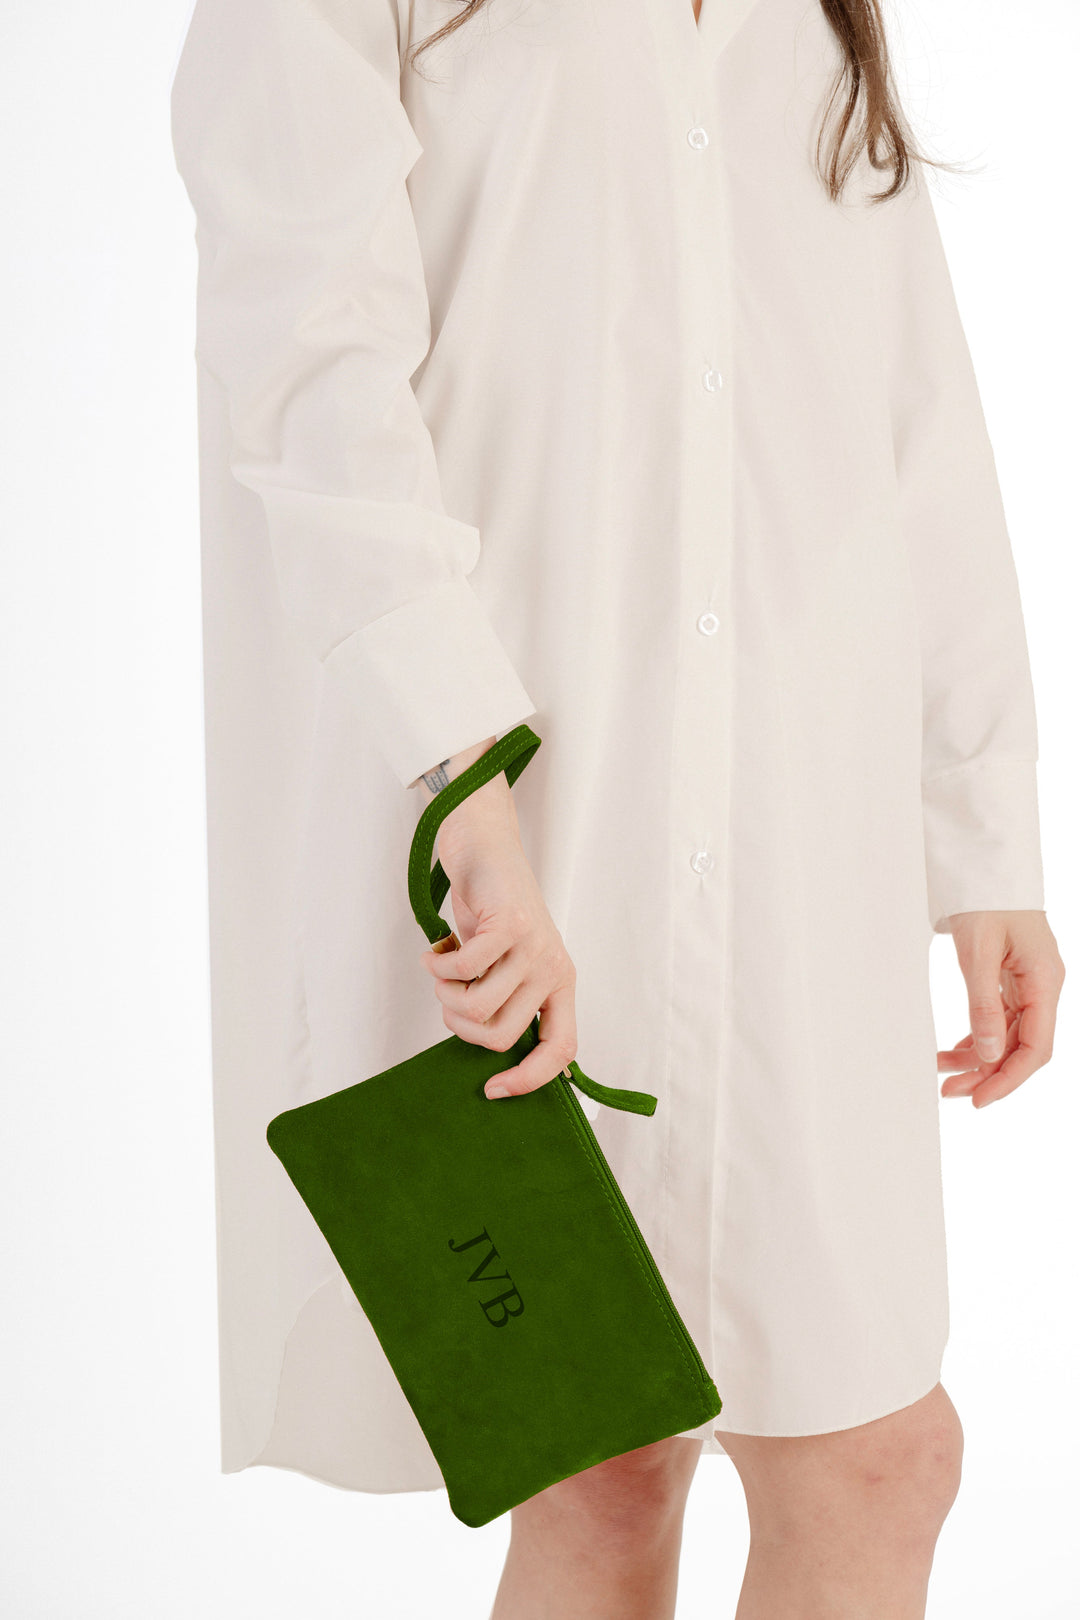 woman holding green suede clutch with initials JVB